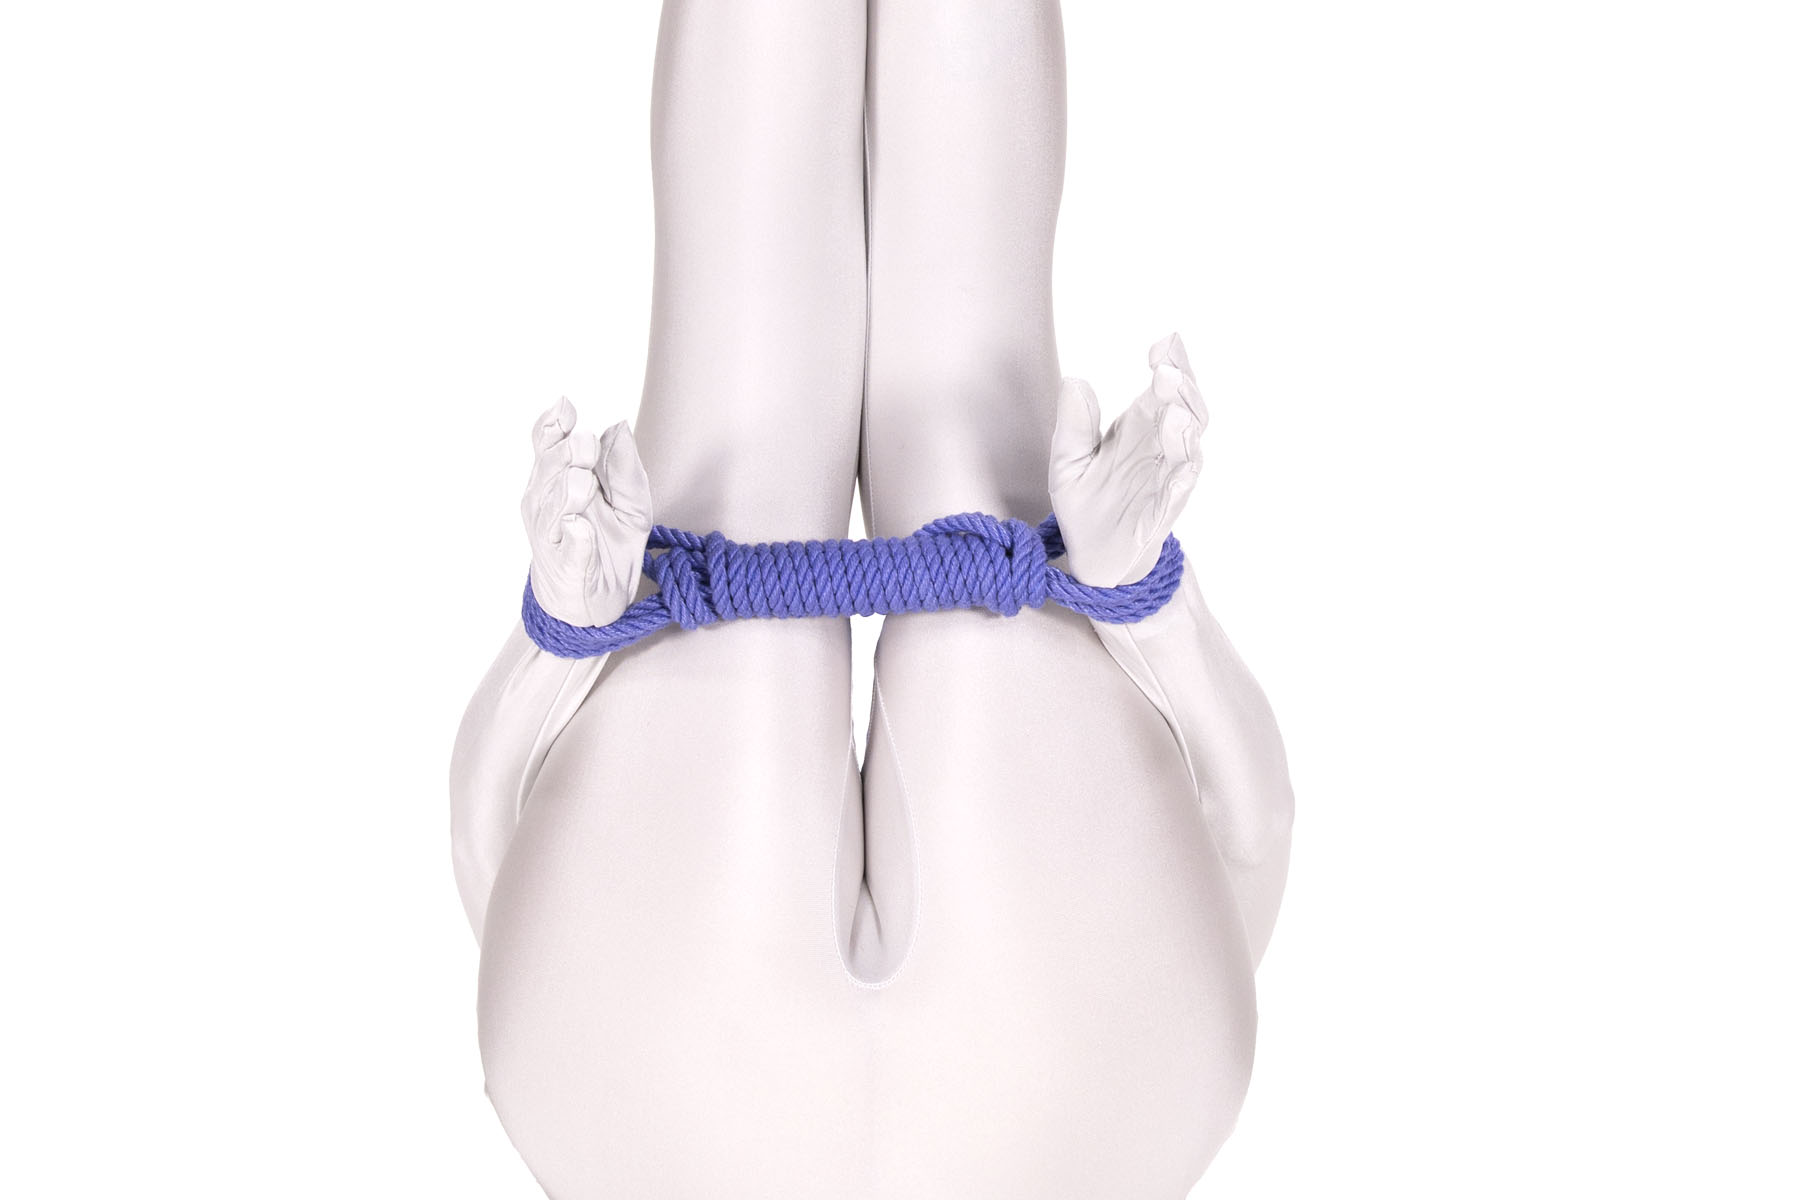 A person in a white bodysuit is lying on their back with their legs straight up in the air. Their hands are held next to their knees and their wrists are tied together with a long bar tie in blue rope. The bar tie passes right behind their knees.